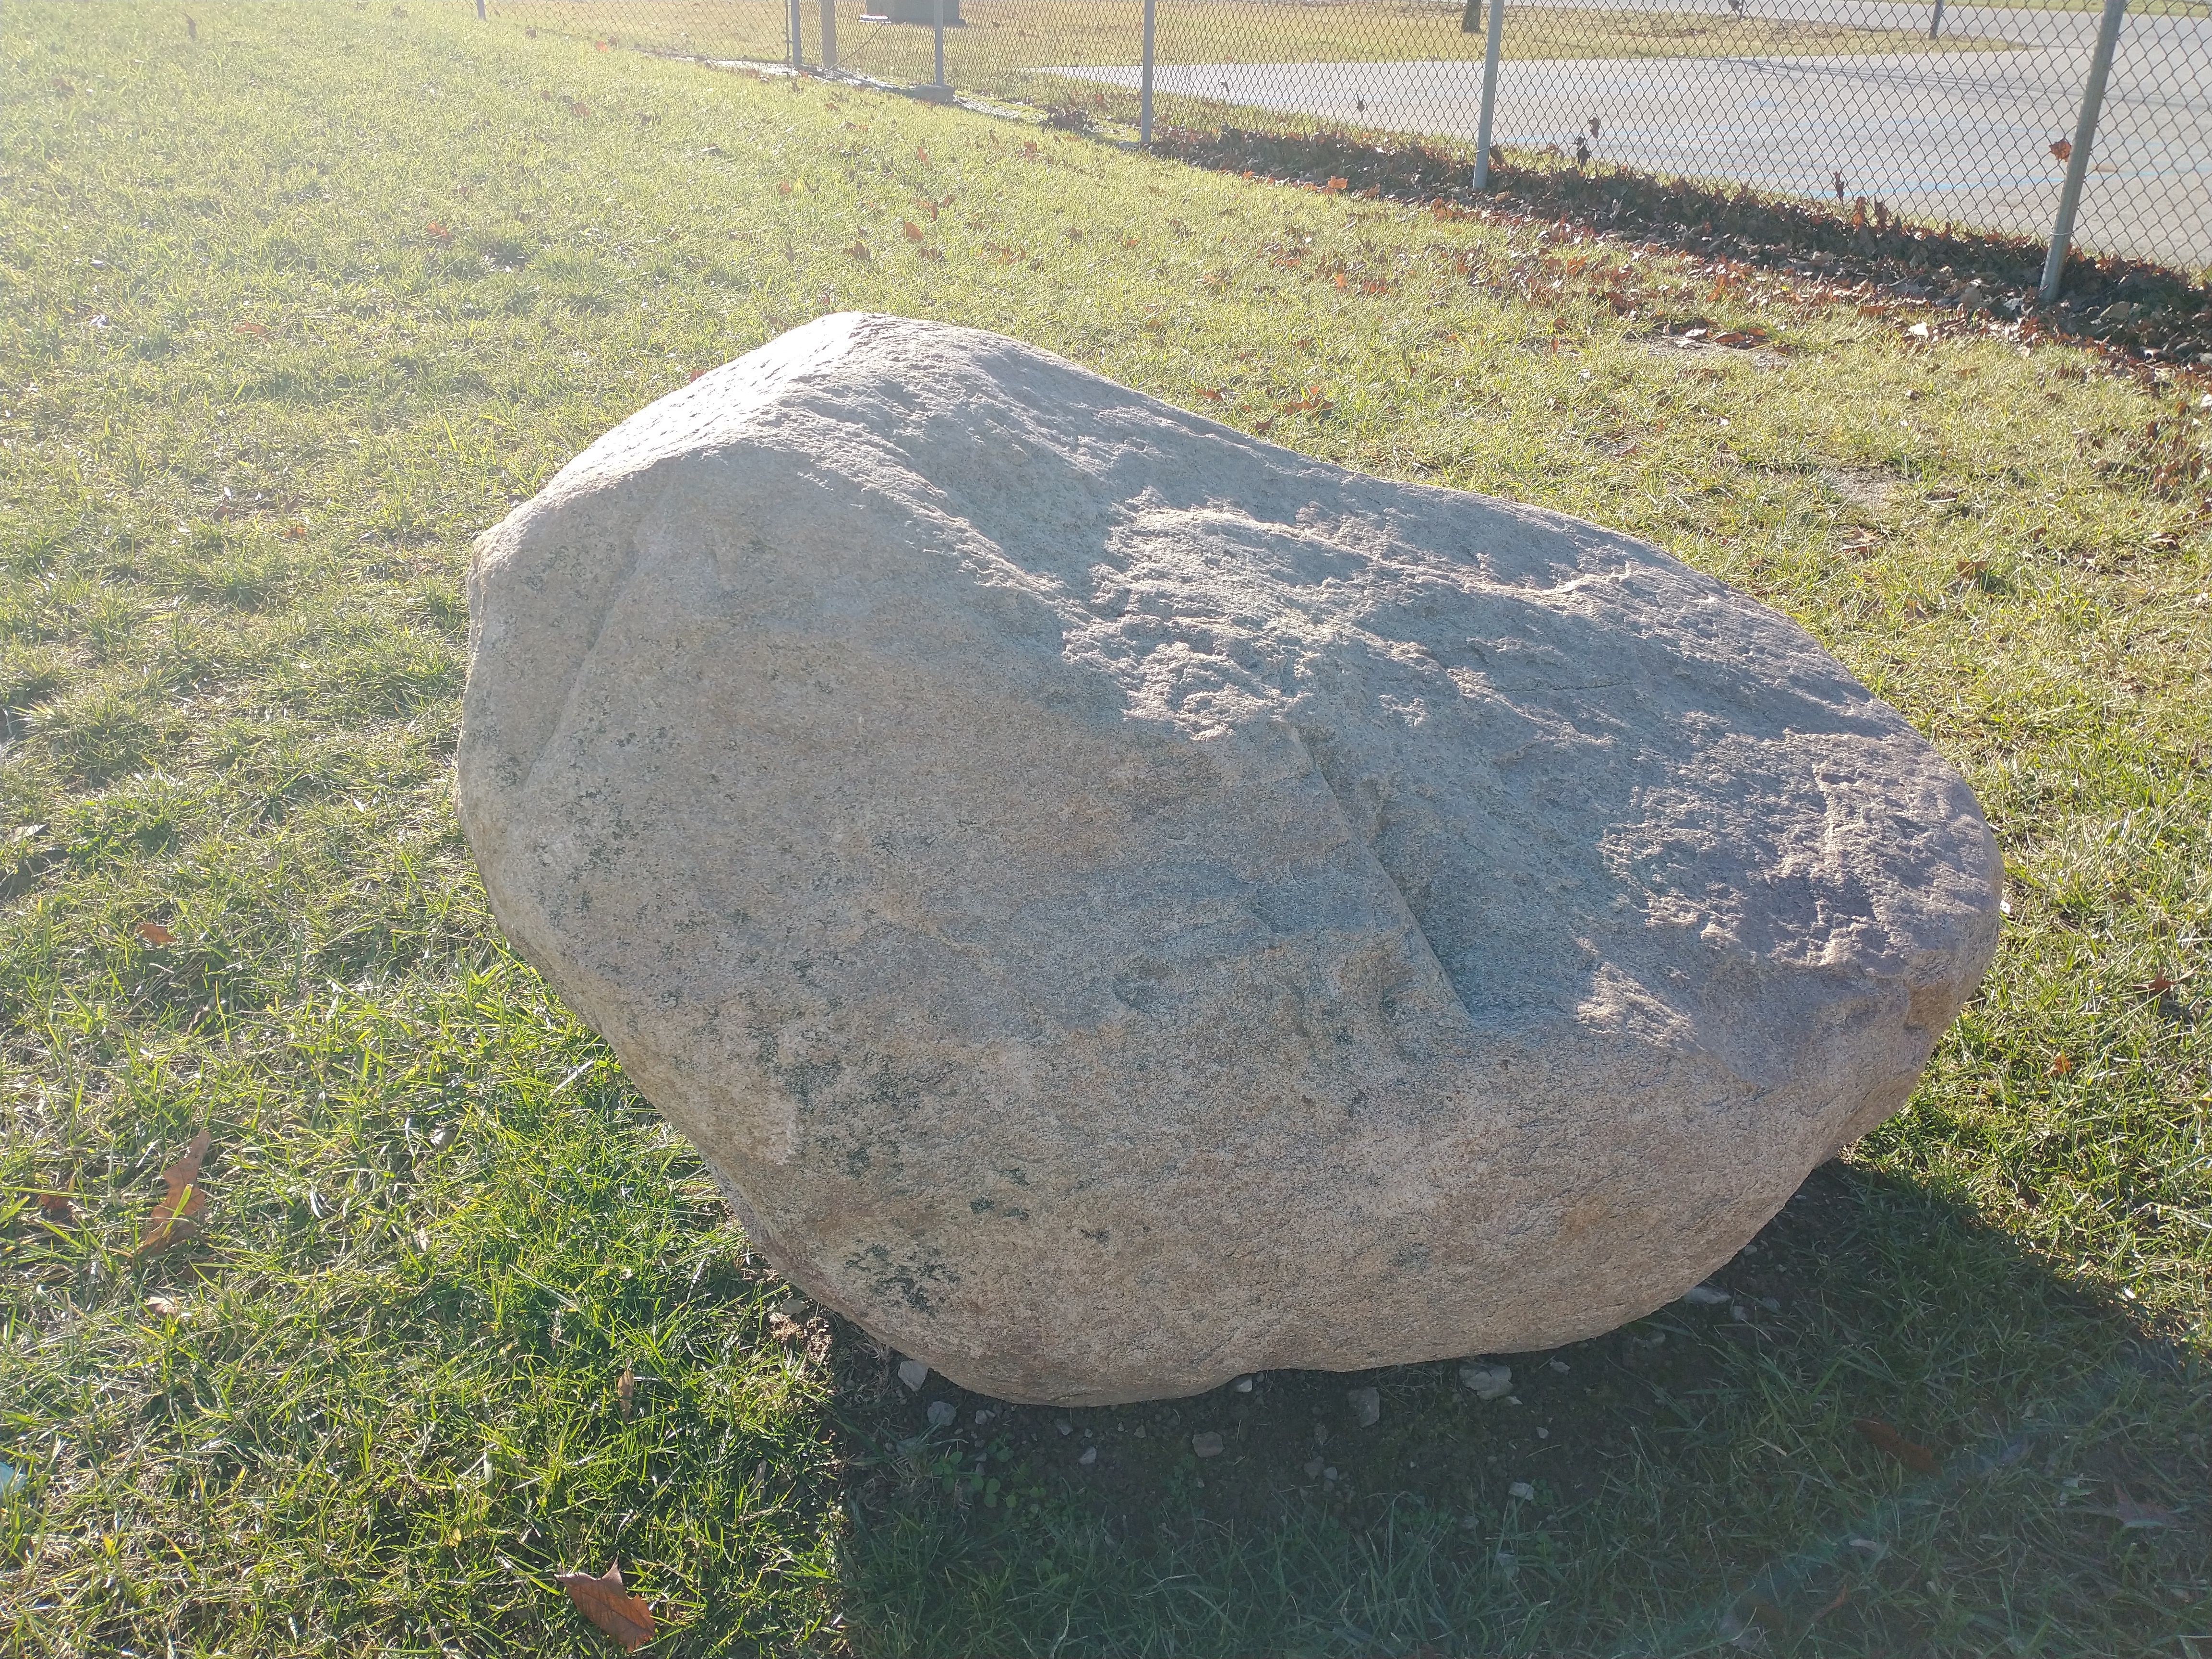 The Rock Marker